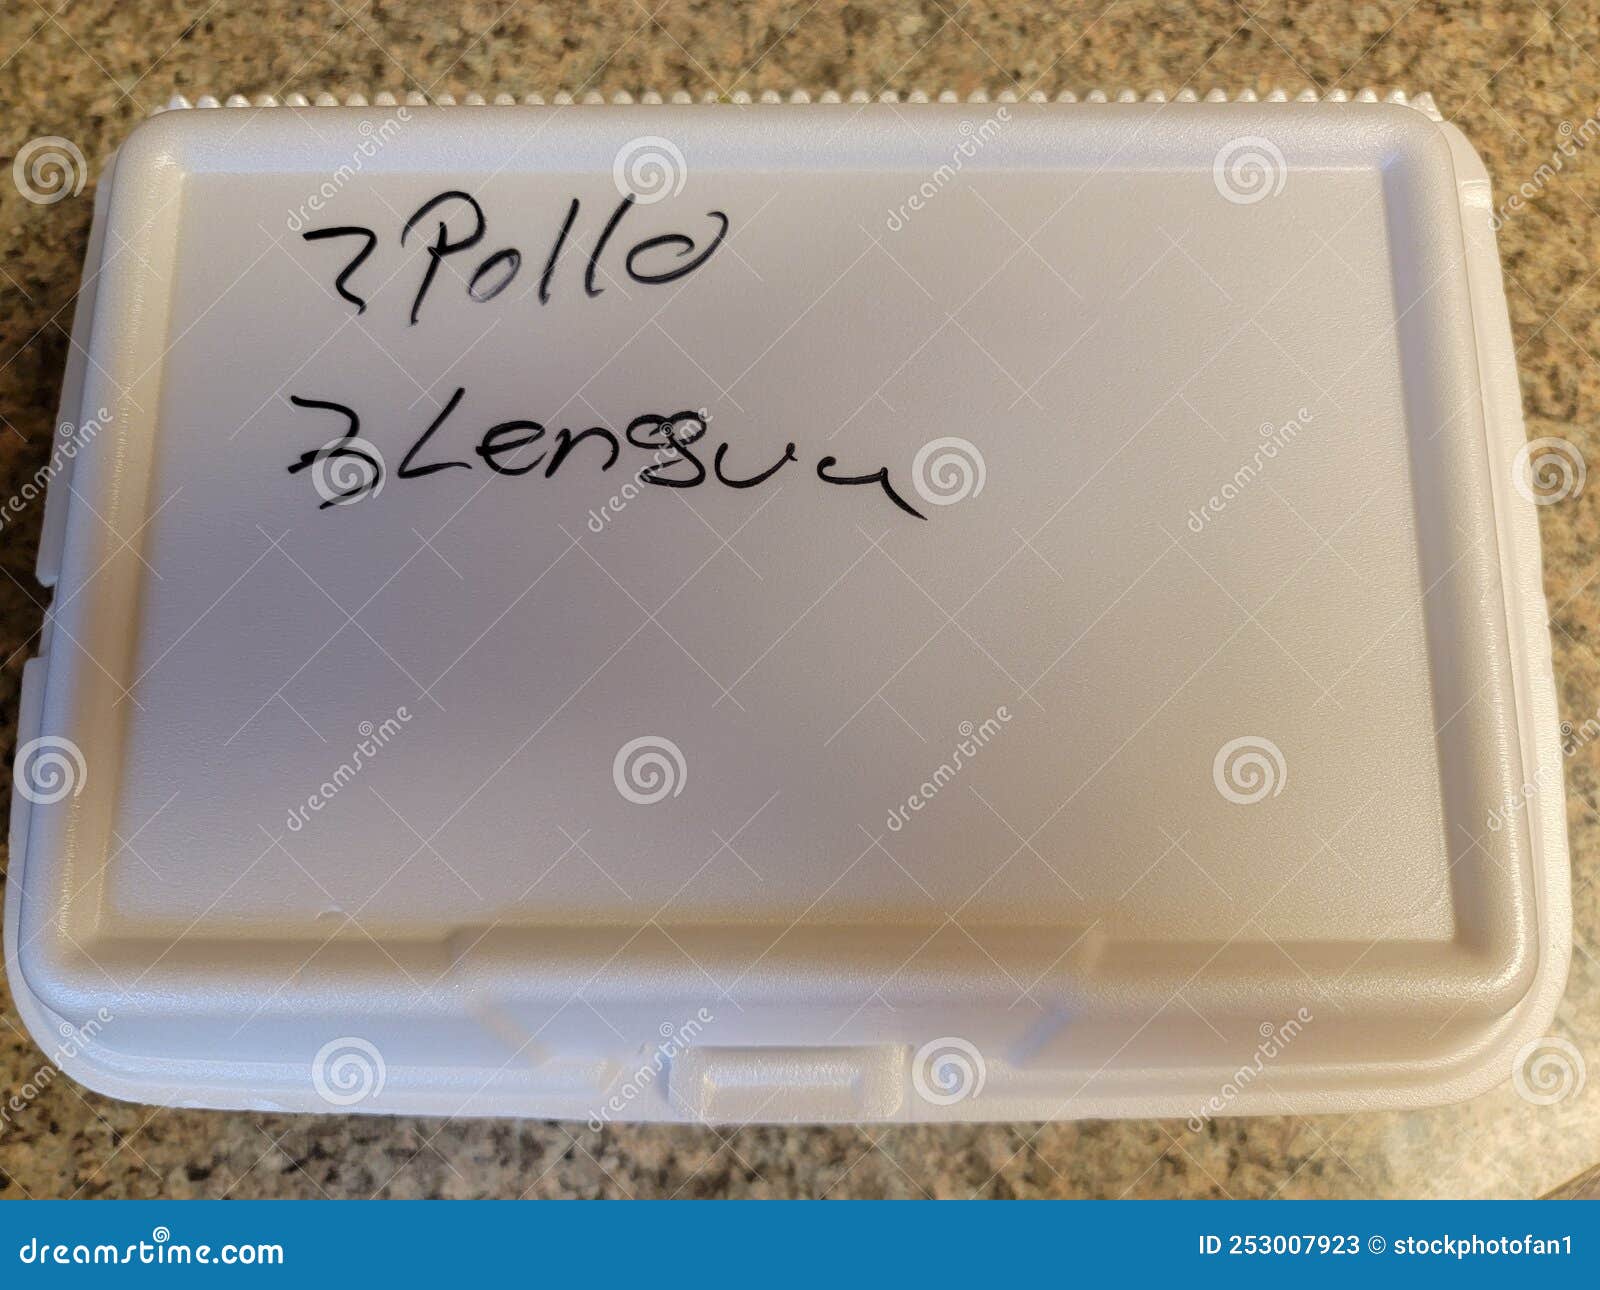 mexican food take out box saying 2 pollo chicken and 3 lengua tongue